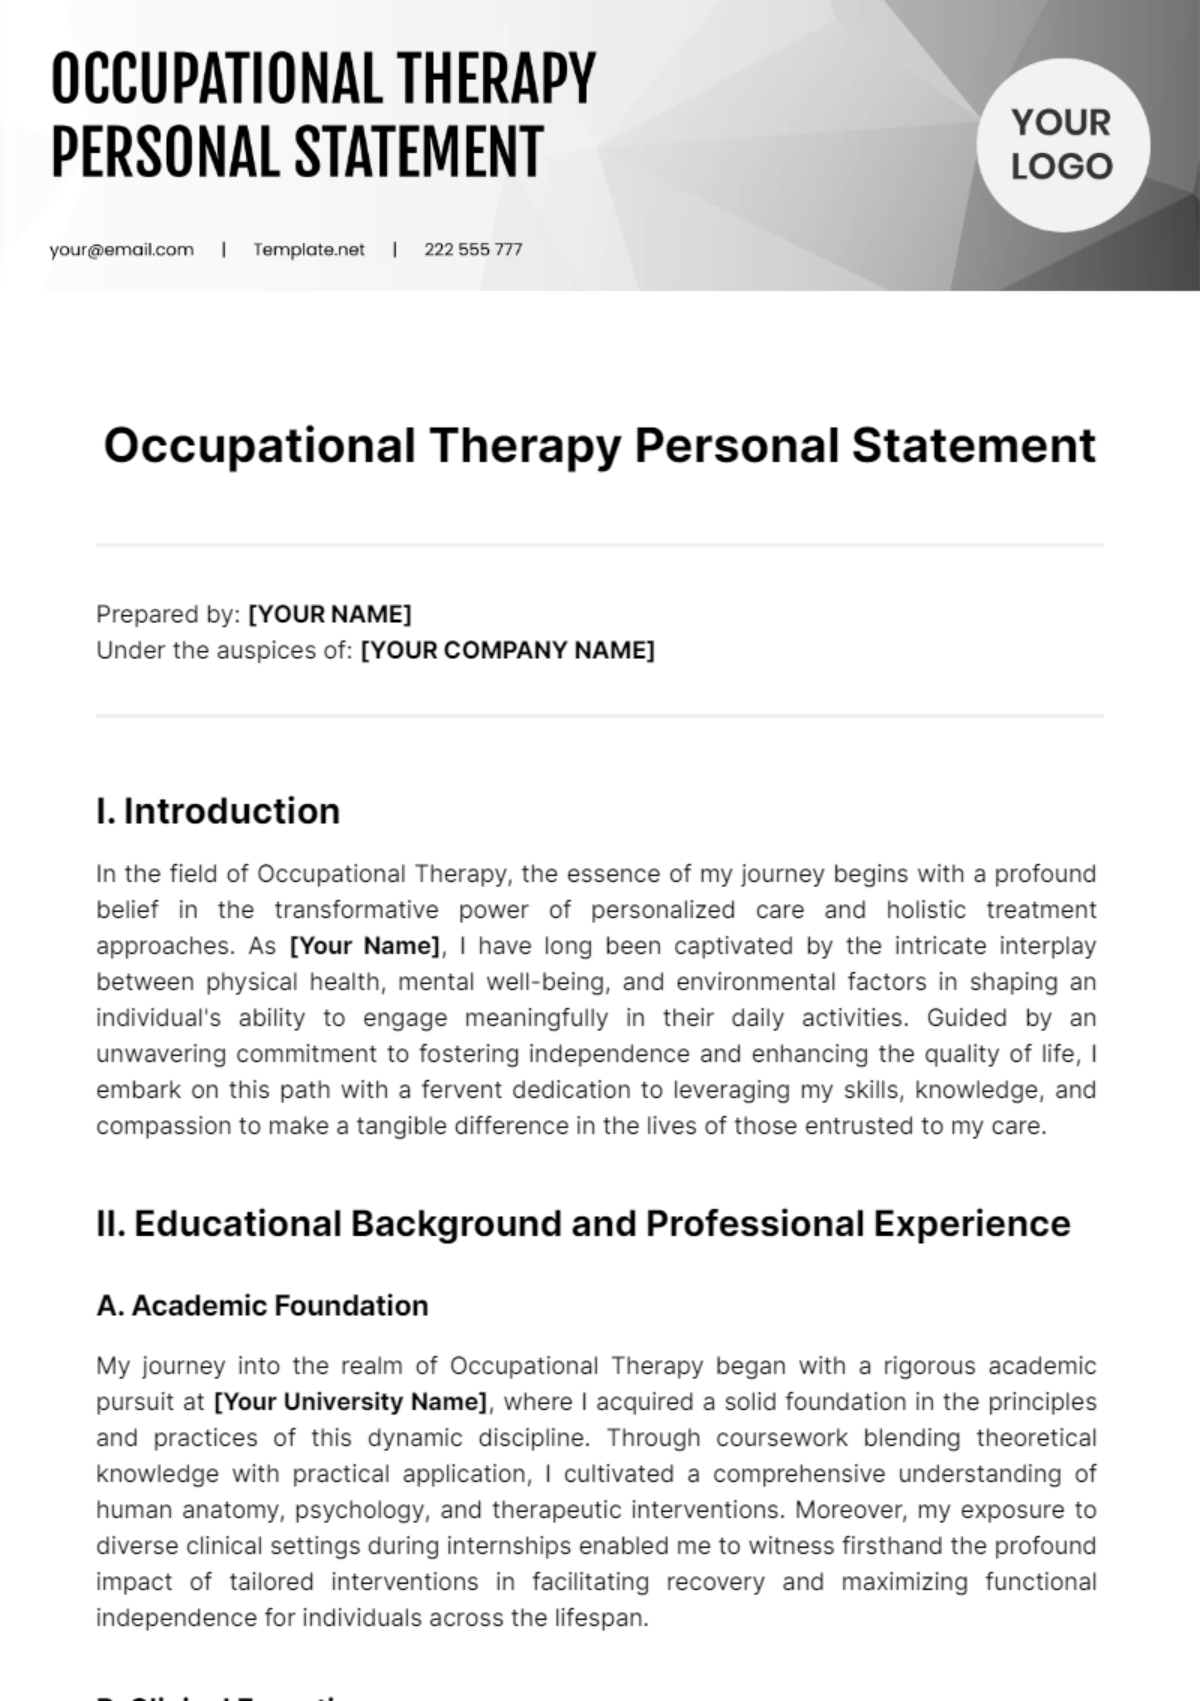 Occupational Therapy Personal Statement Template